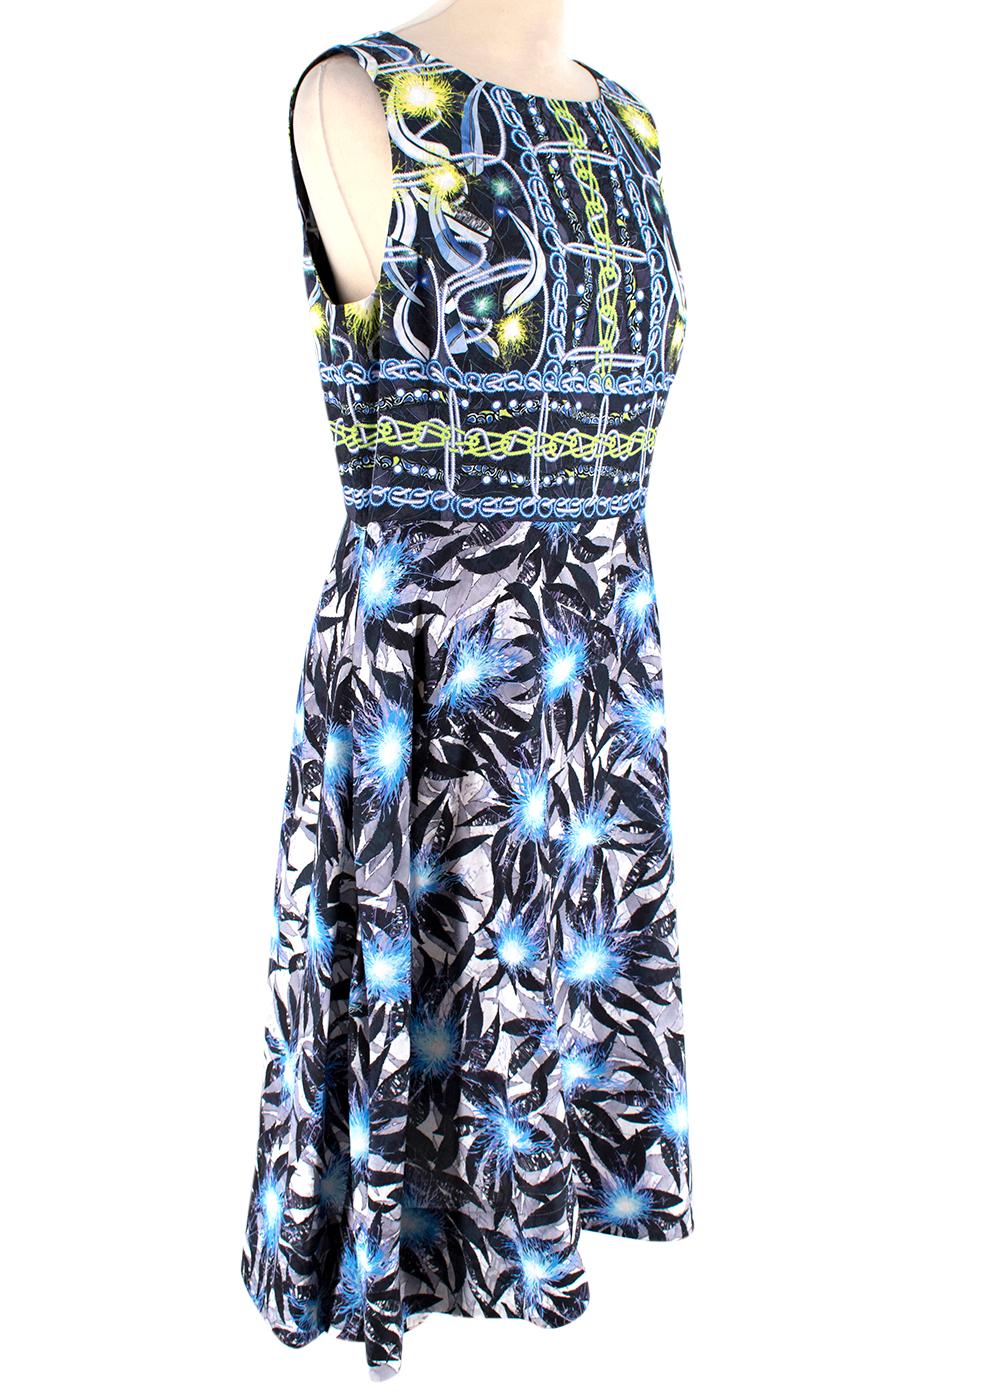 Peter Pilotto Leaf-print Silk-Blend Dress

- Blue leaf pattern all over 
- Cut out details 
- Back zip fastening  
- Sleeveless 
- Soft, lightweight fabric
Measurements are taken laying flat, seam to seam. 

Length - 106cm
Chest - 40cm
